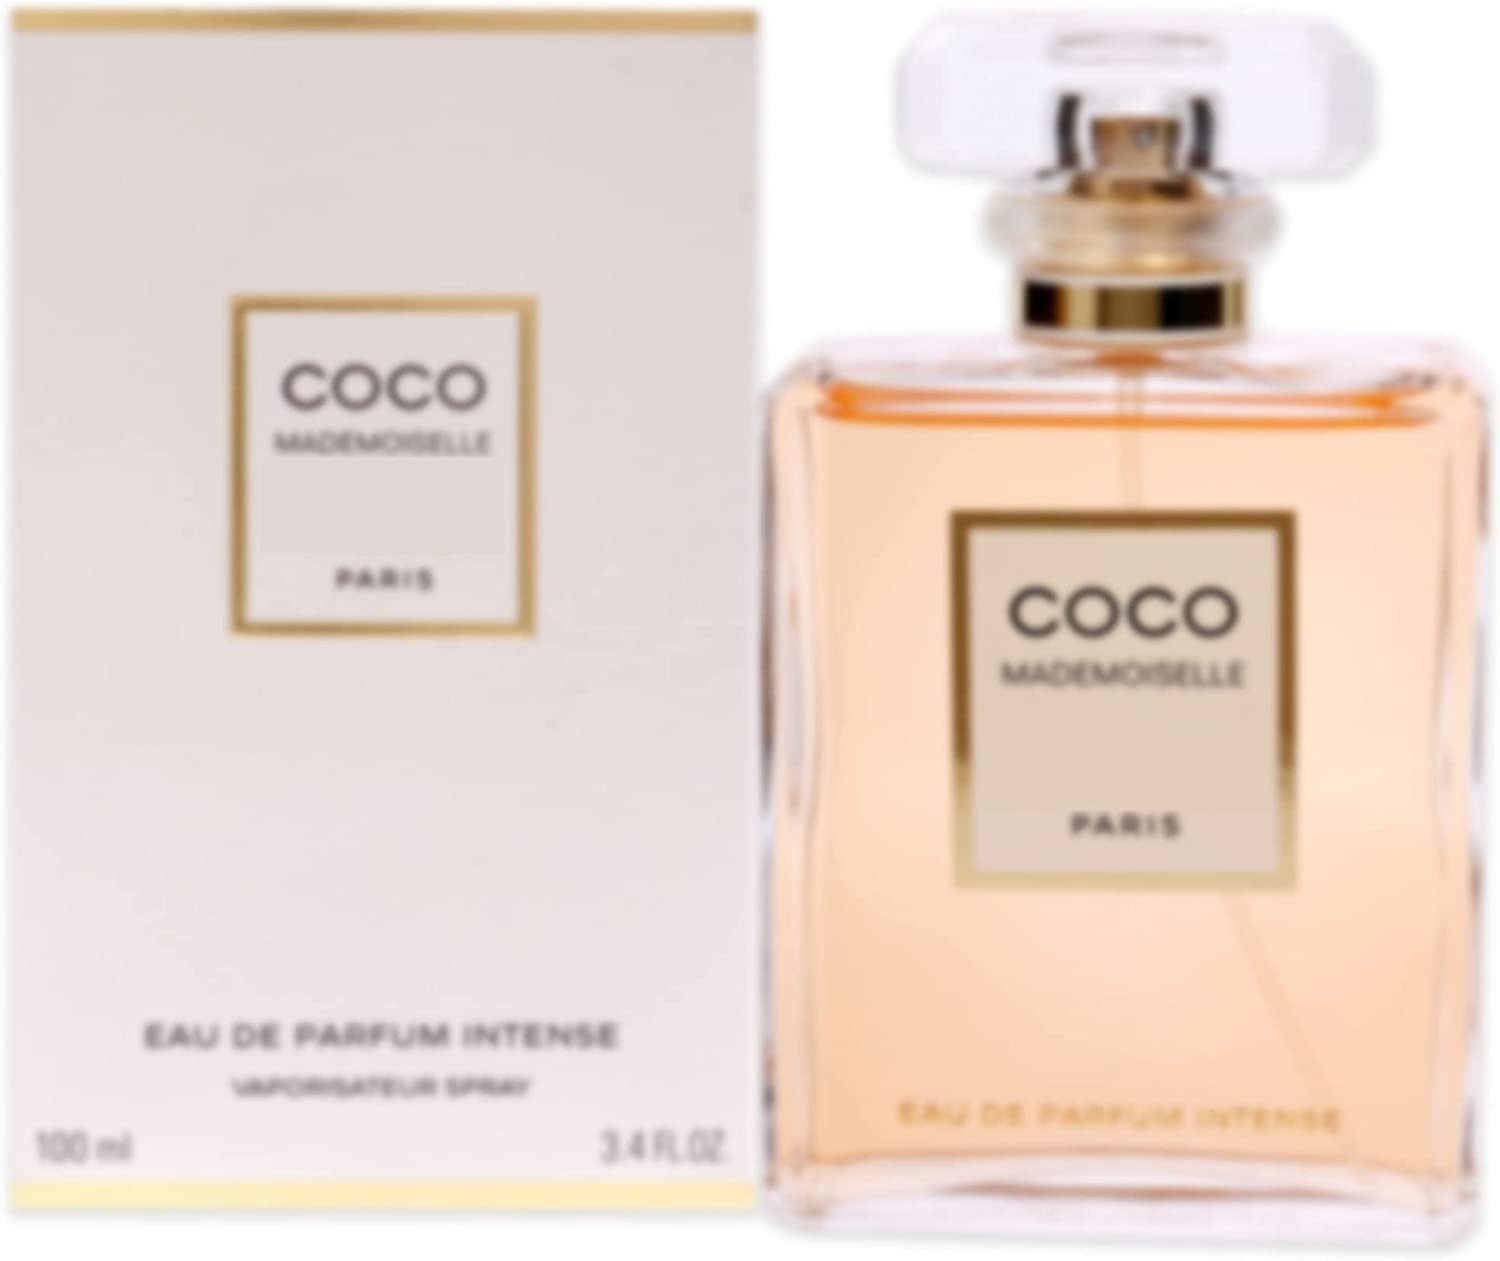 Coco-Mademoiselle Intense Perfume Review